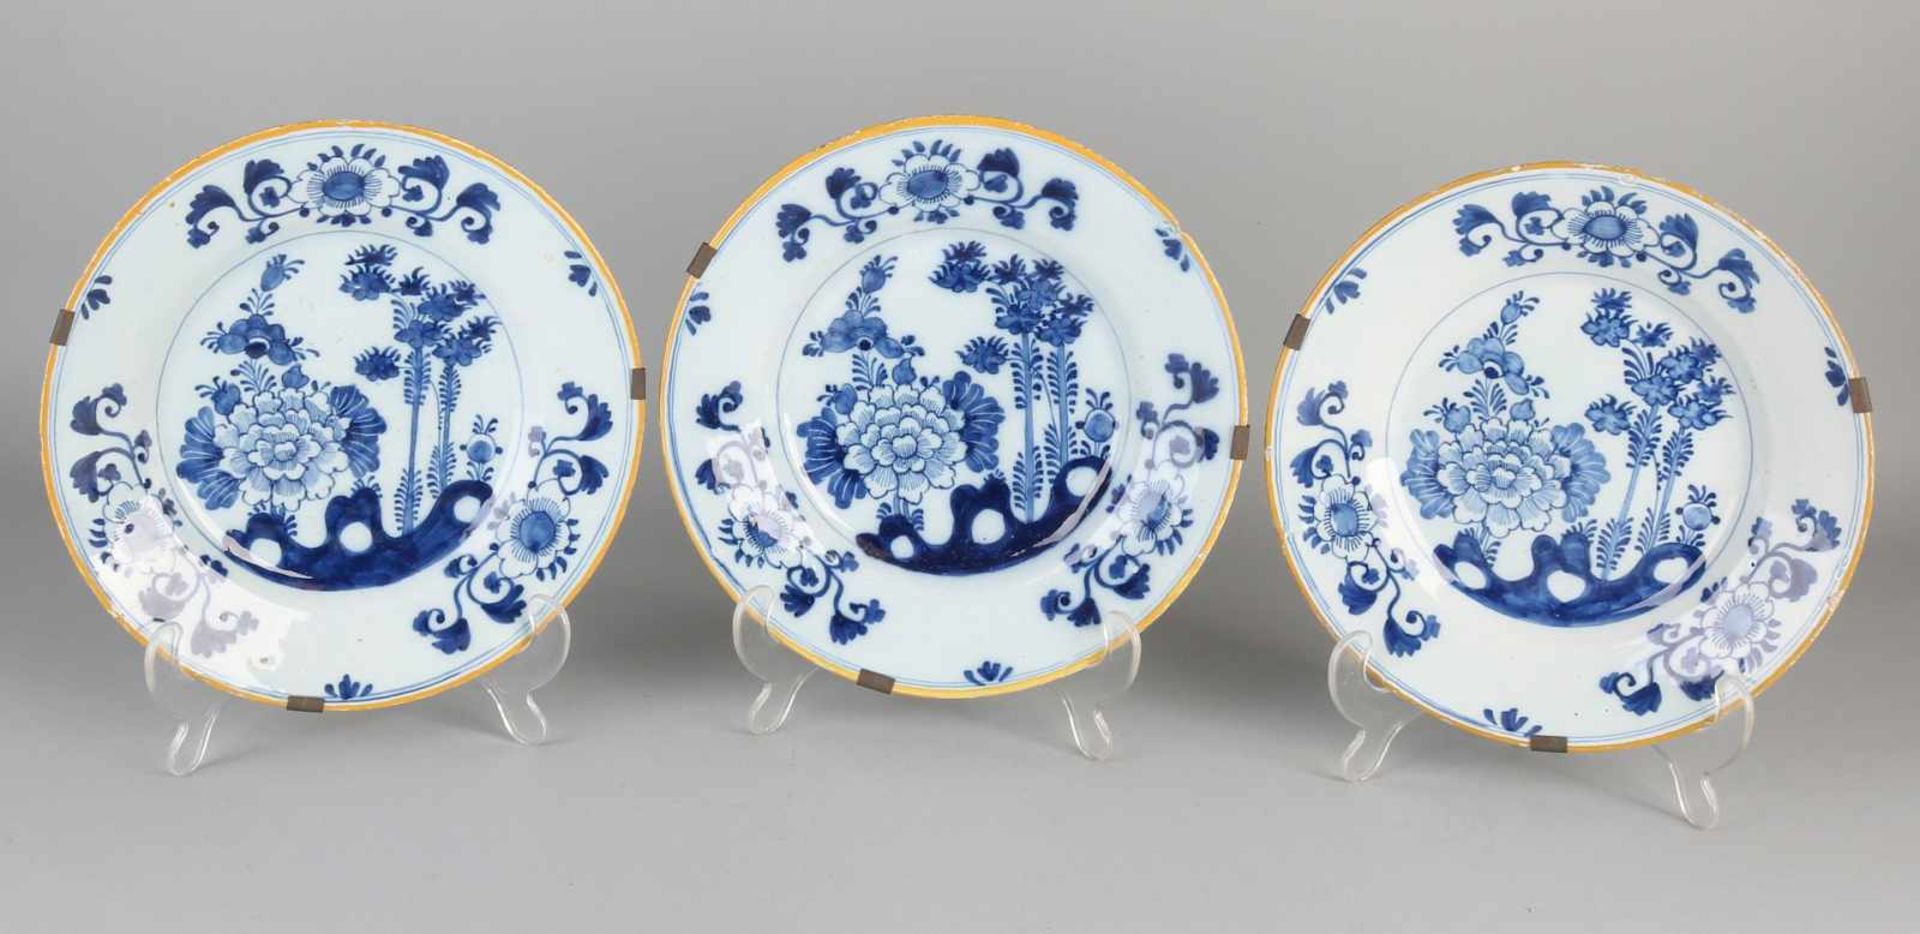 Three 18th century Delft Fayence signs with chinoiserie decoration and bottom mark The Klaauw. Size: